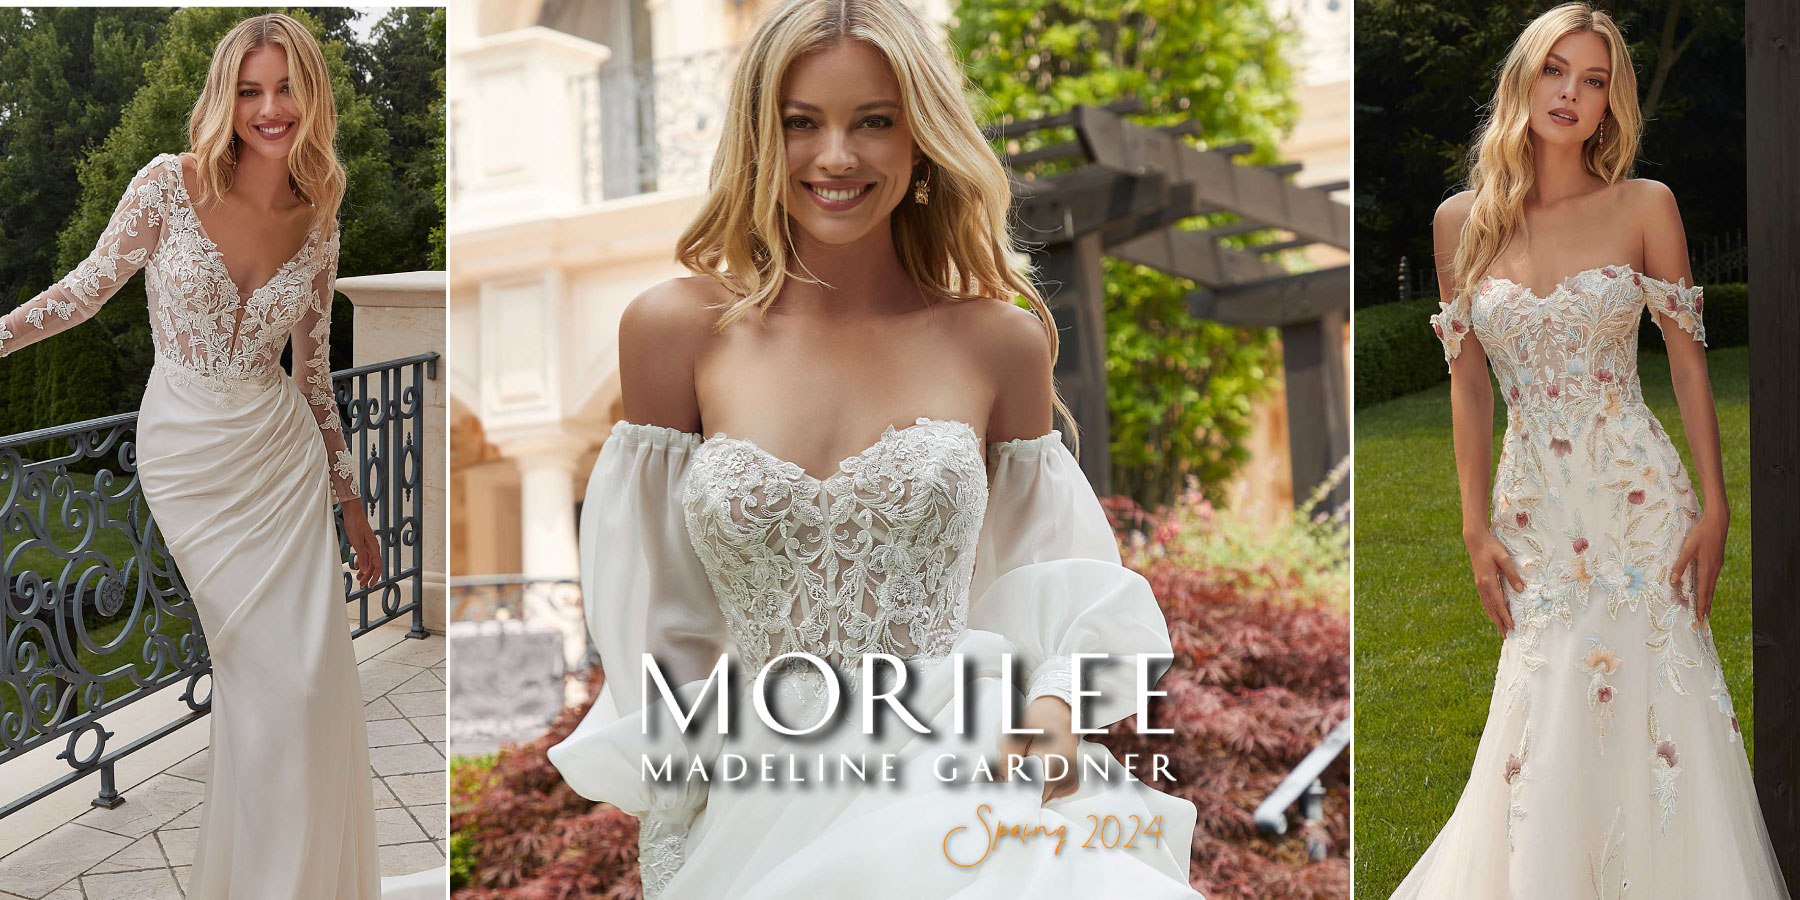 Morilee Bridal Retailers in the United States